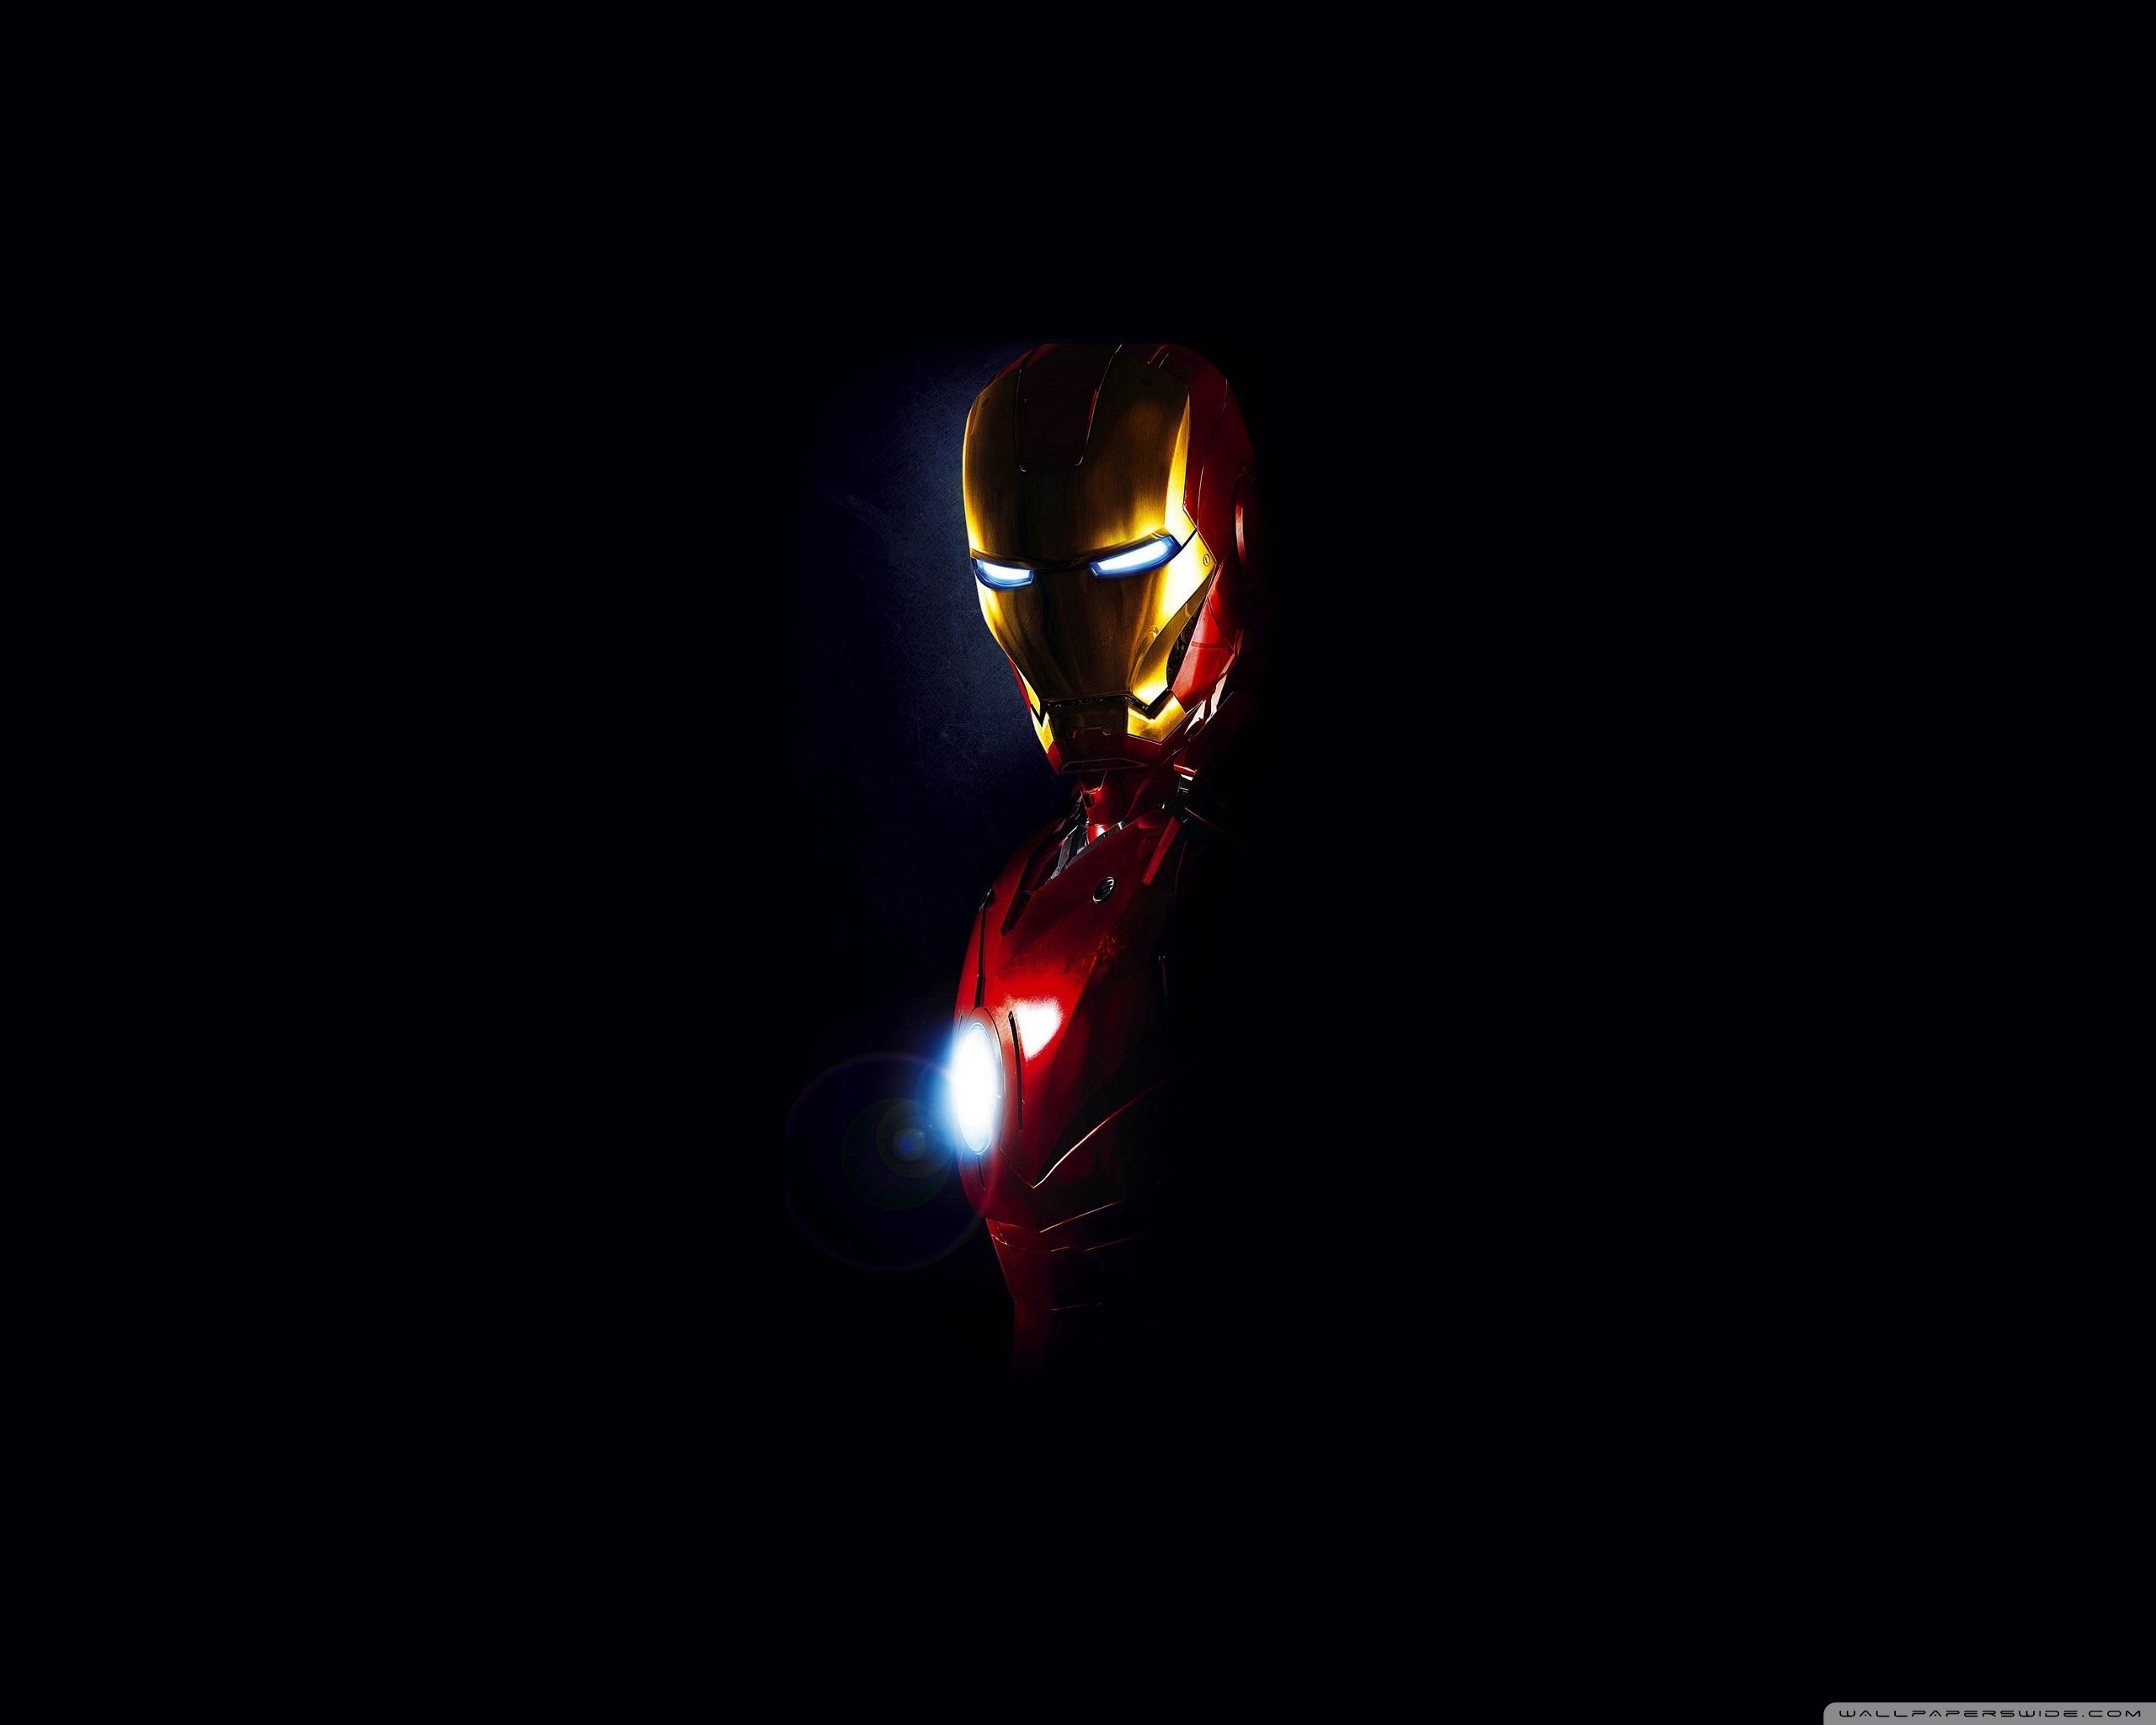 2560x2048 HD Images Collection of Iron Man HD: 841054876 by Sallie Thurman